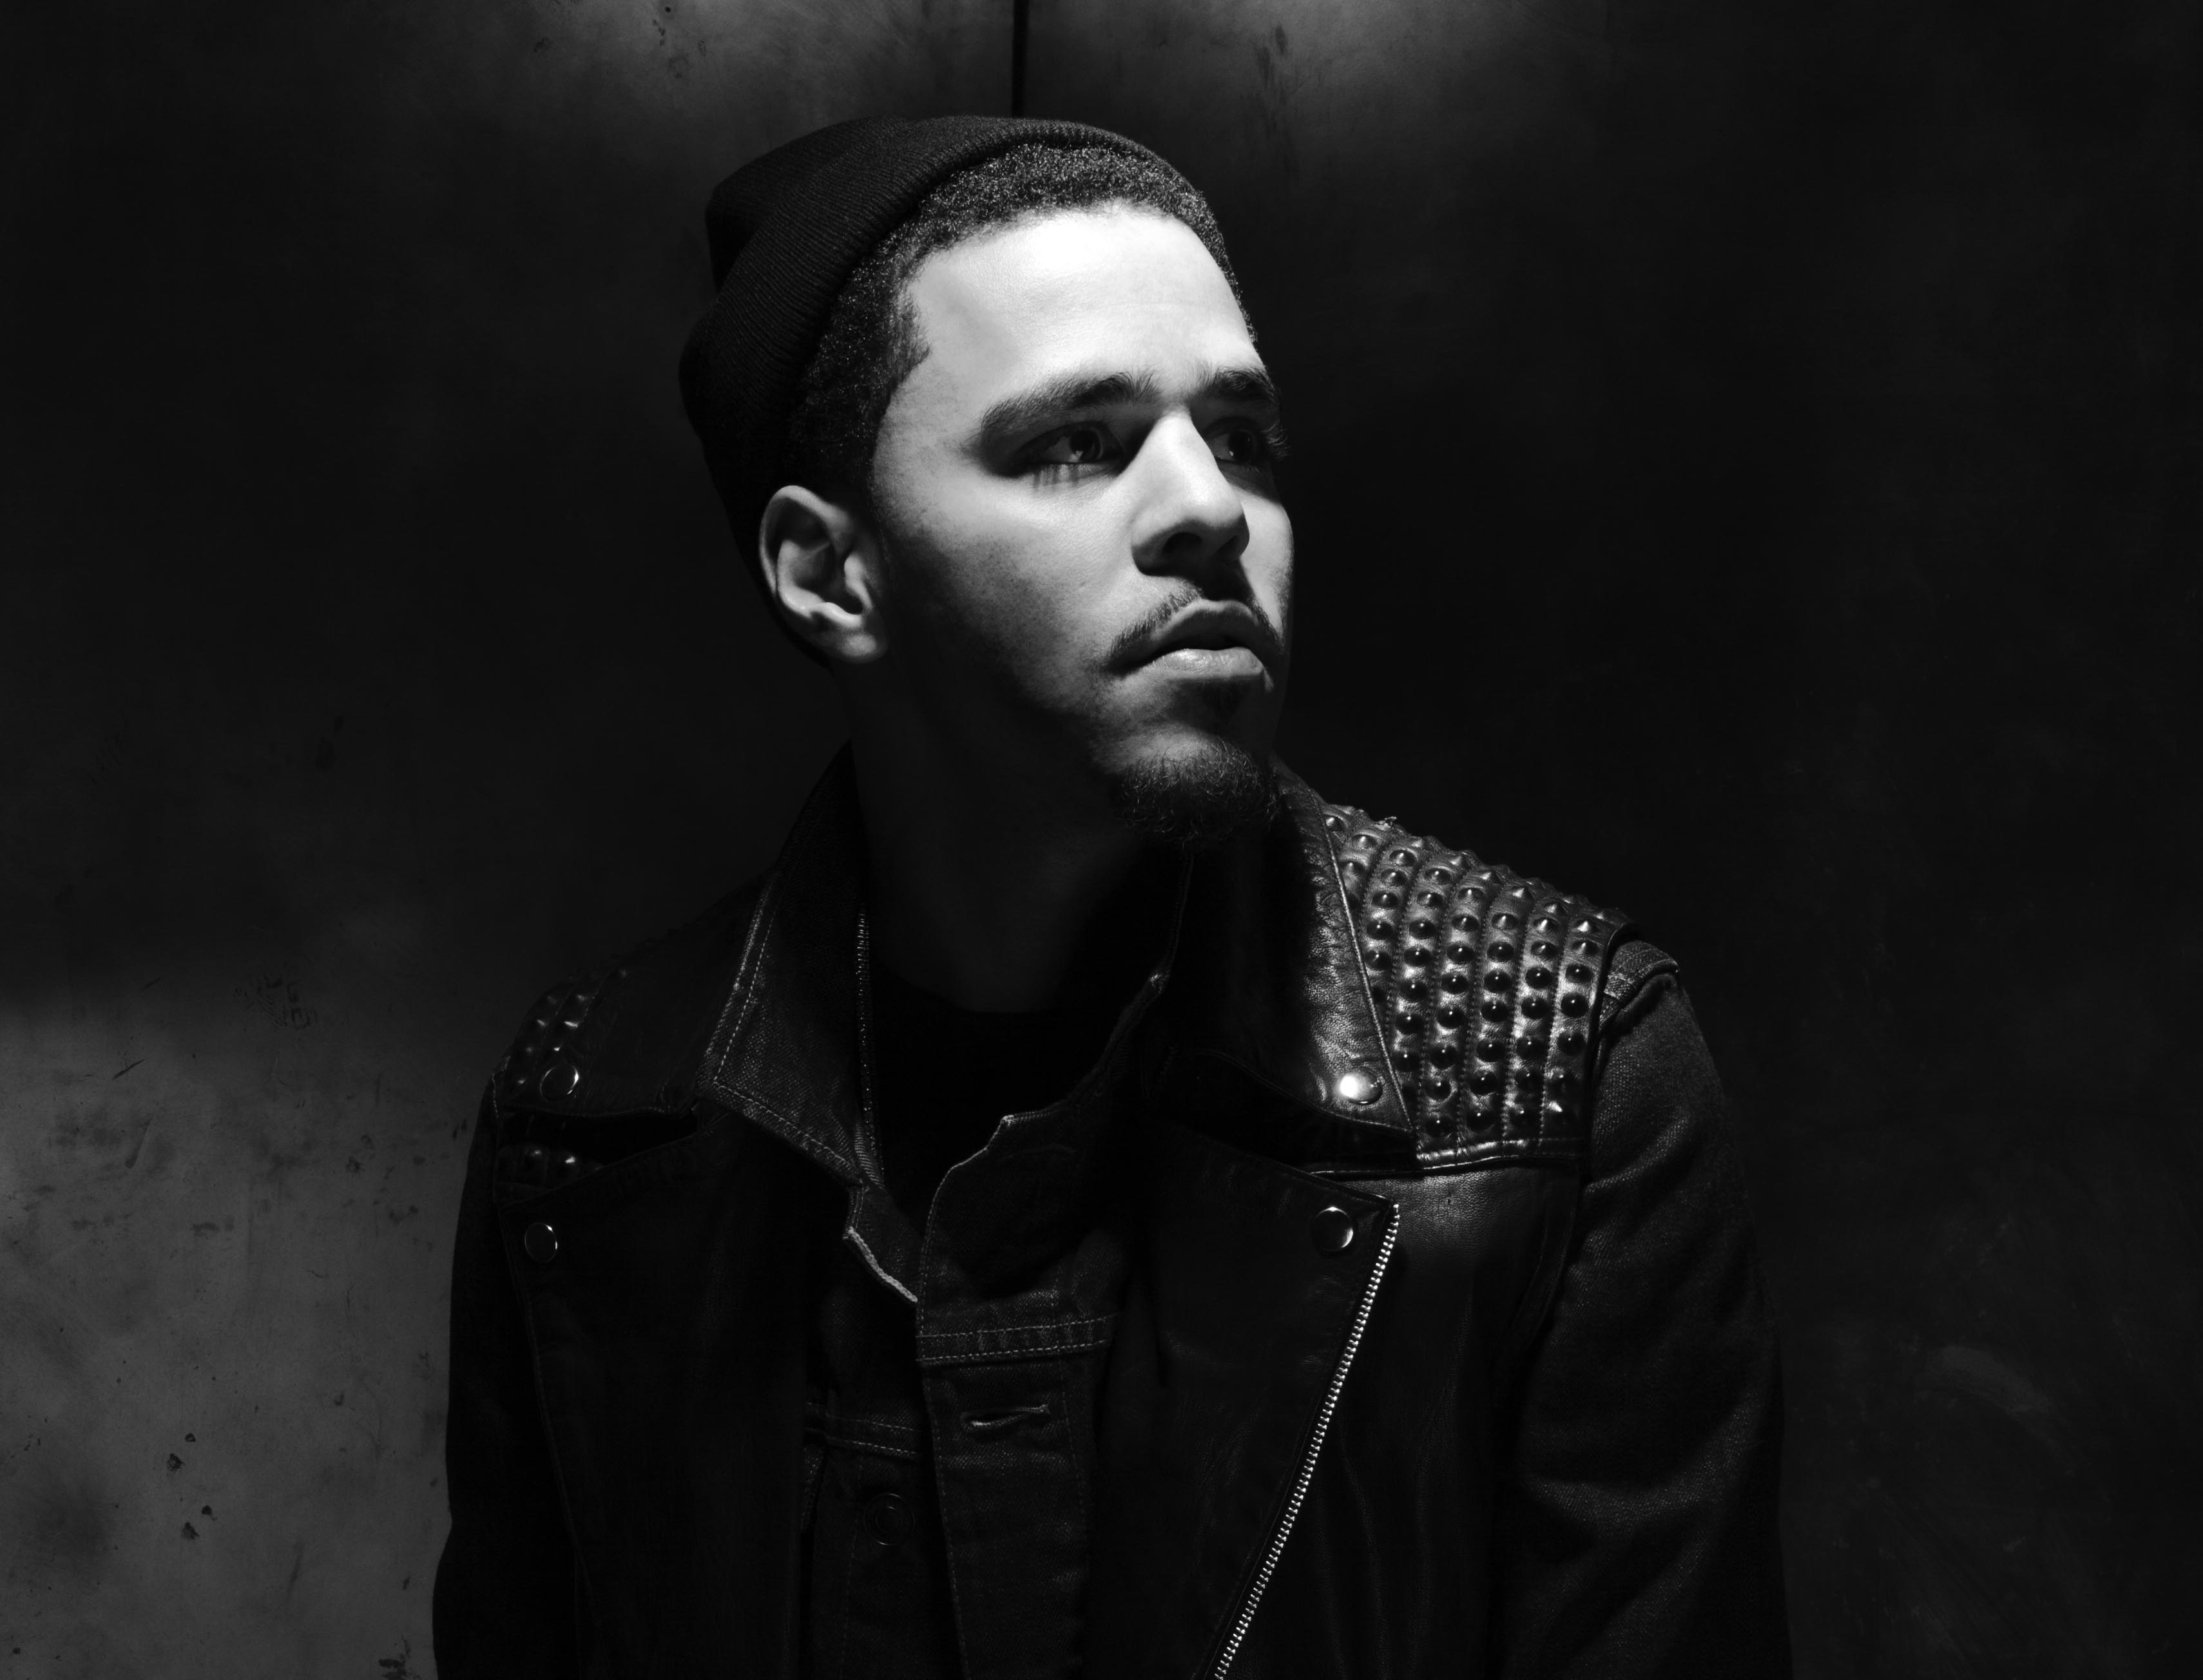 J. Cole Brings 'What Dreams May Come' Tour To Europe | Music News - Conversations ...